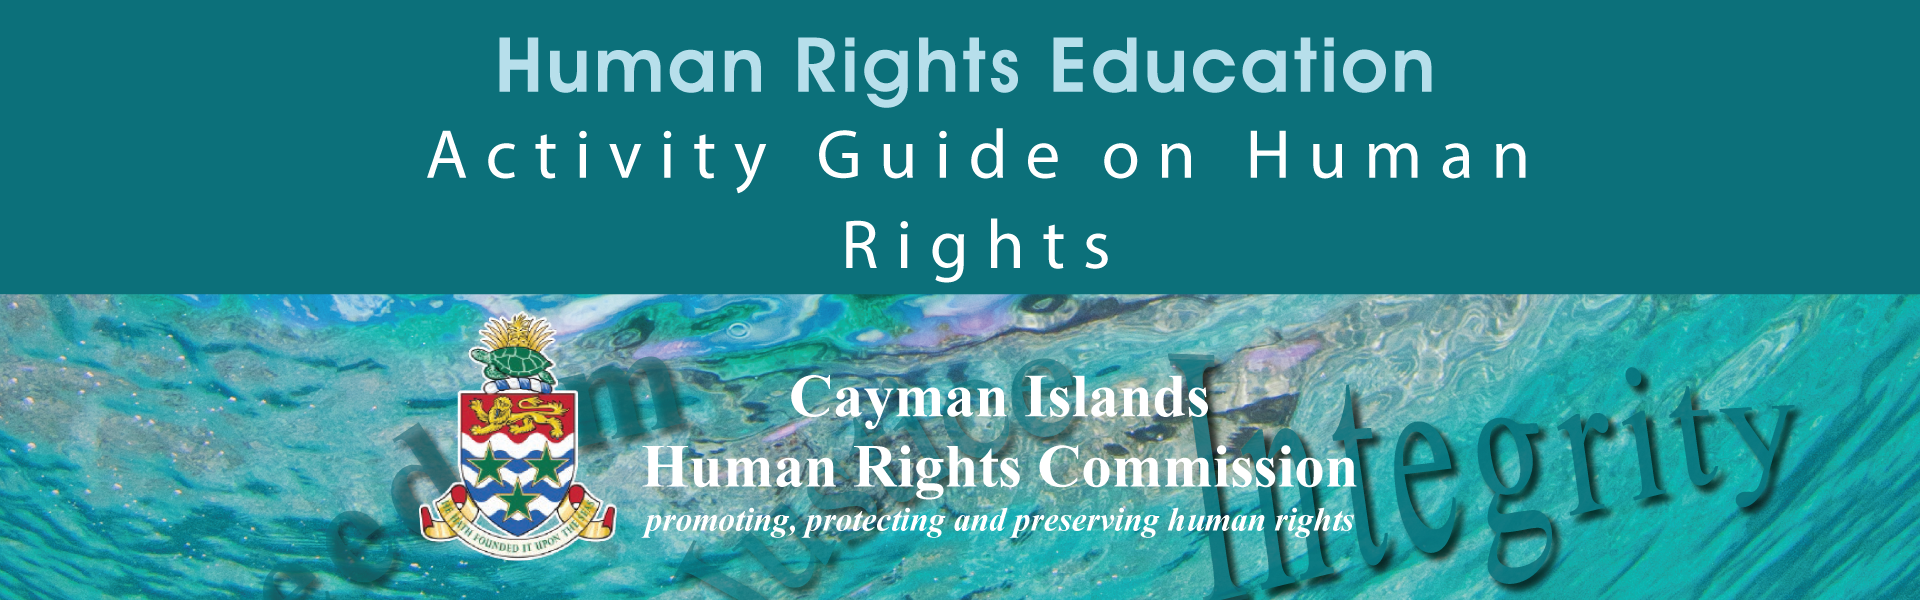 The Teacher’s Human Rights Activity Guide